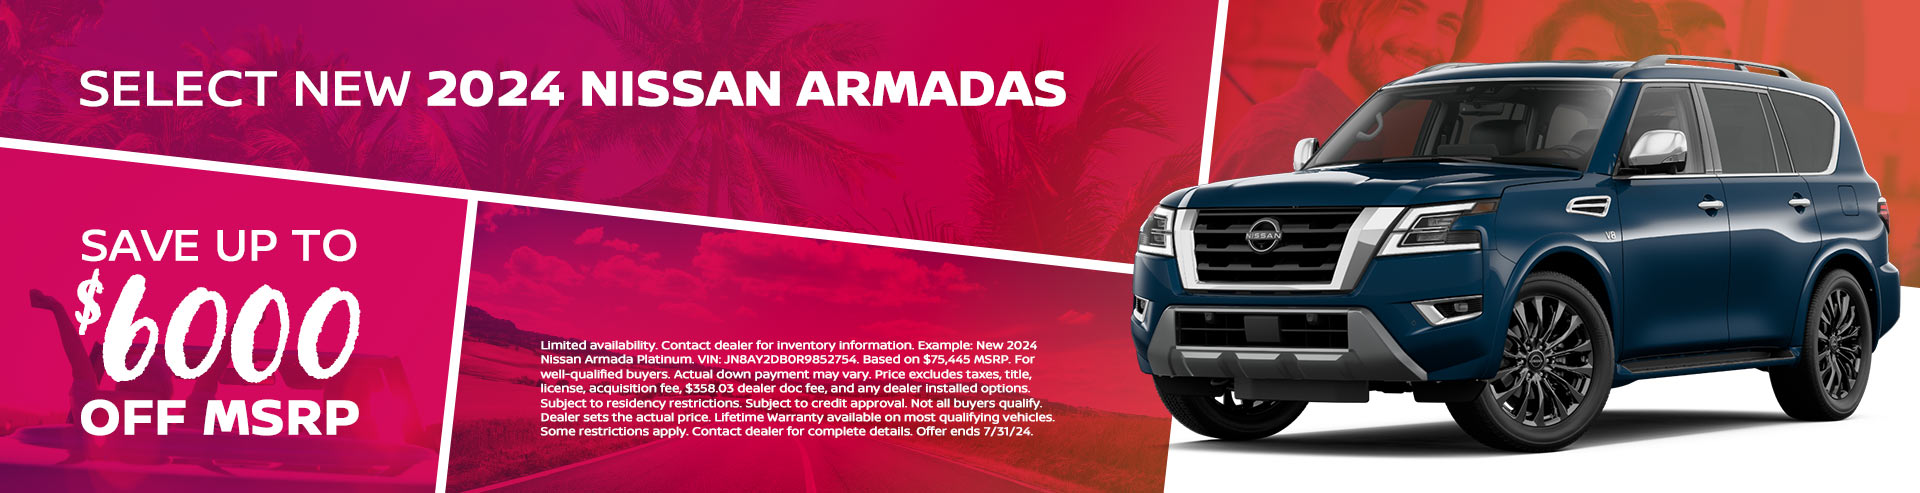 Save up to $6,000 off MSRP on select New 2024 Nissan Armadas